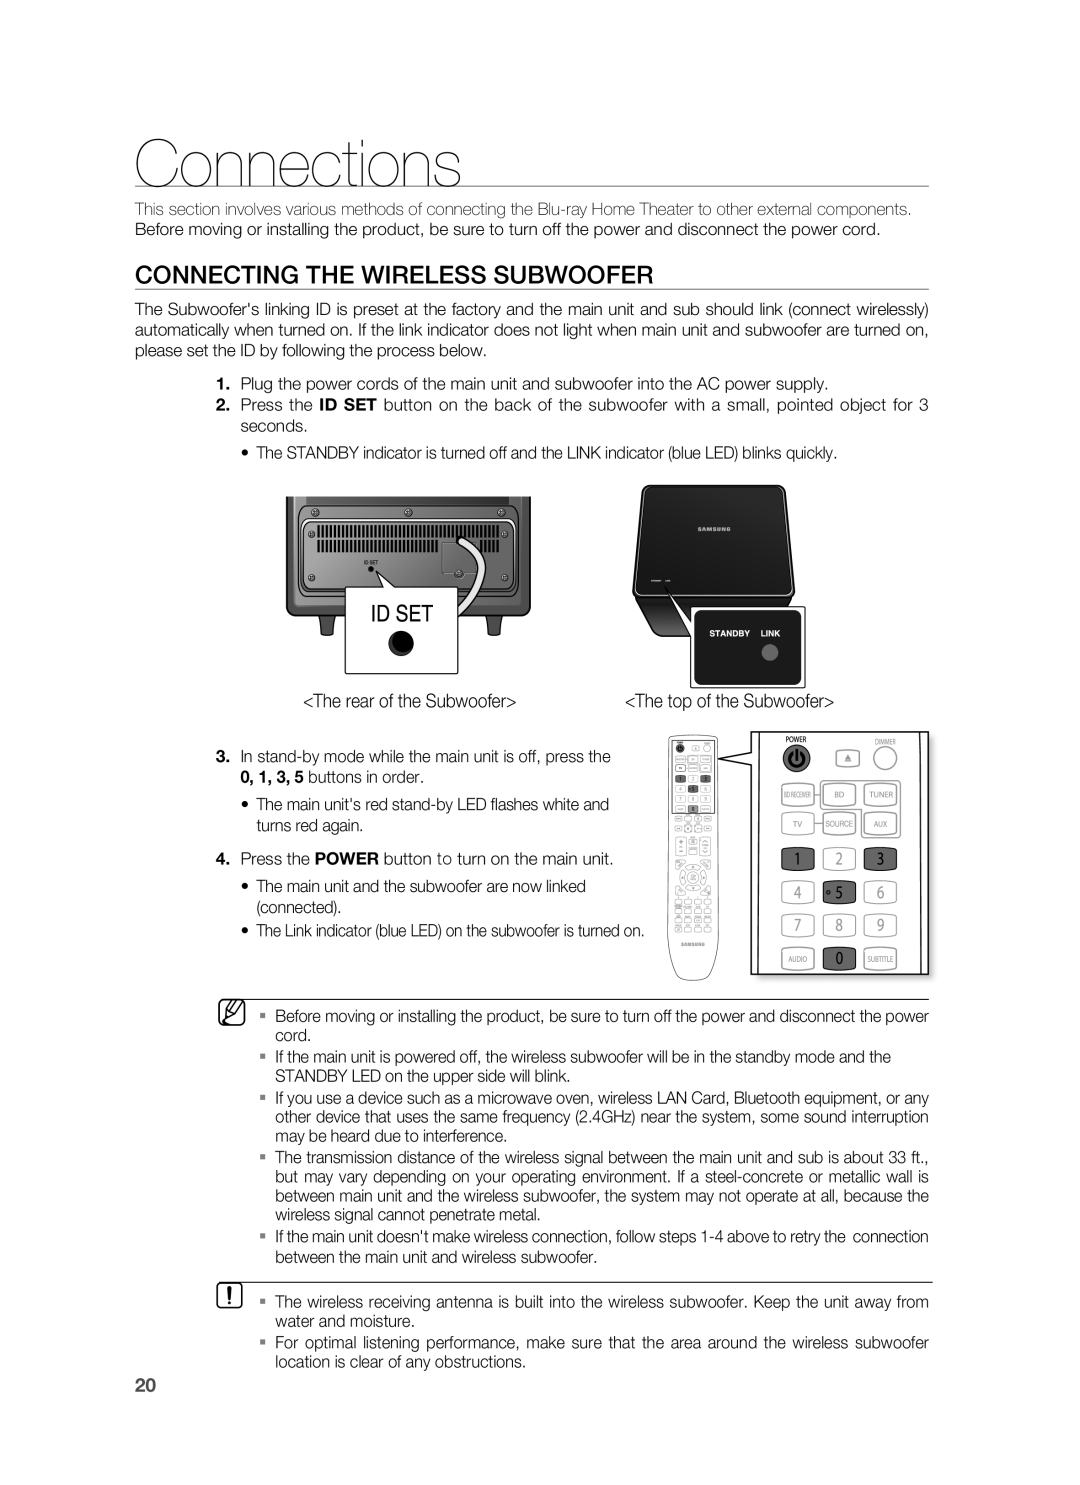 Samsung HT-BD8200 user manual Connections, Connecting The Wireless Subwoofer 